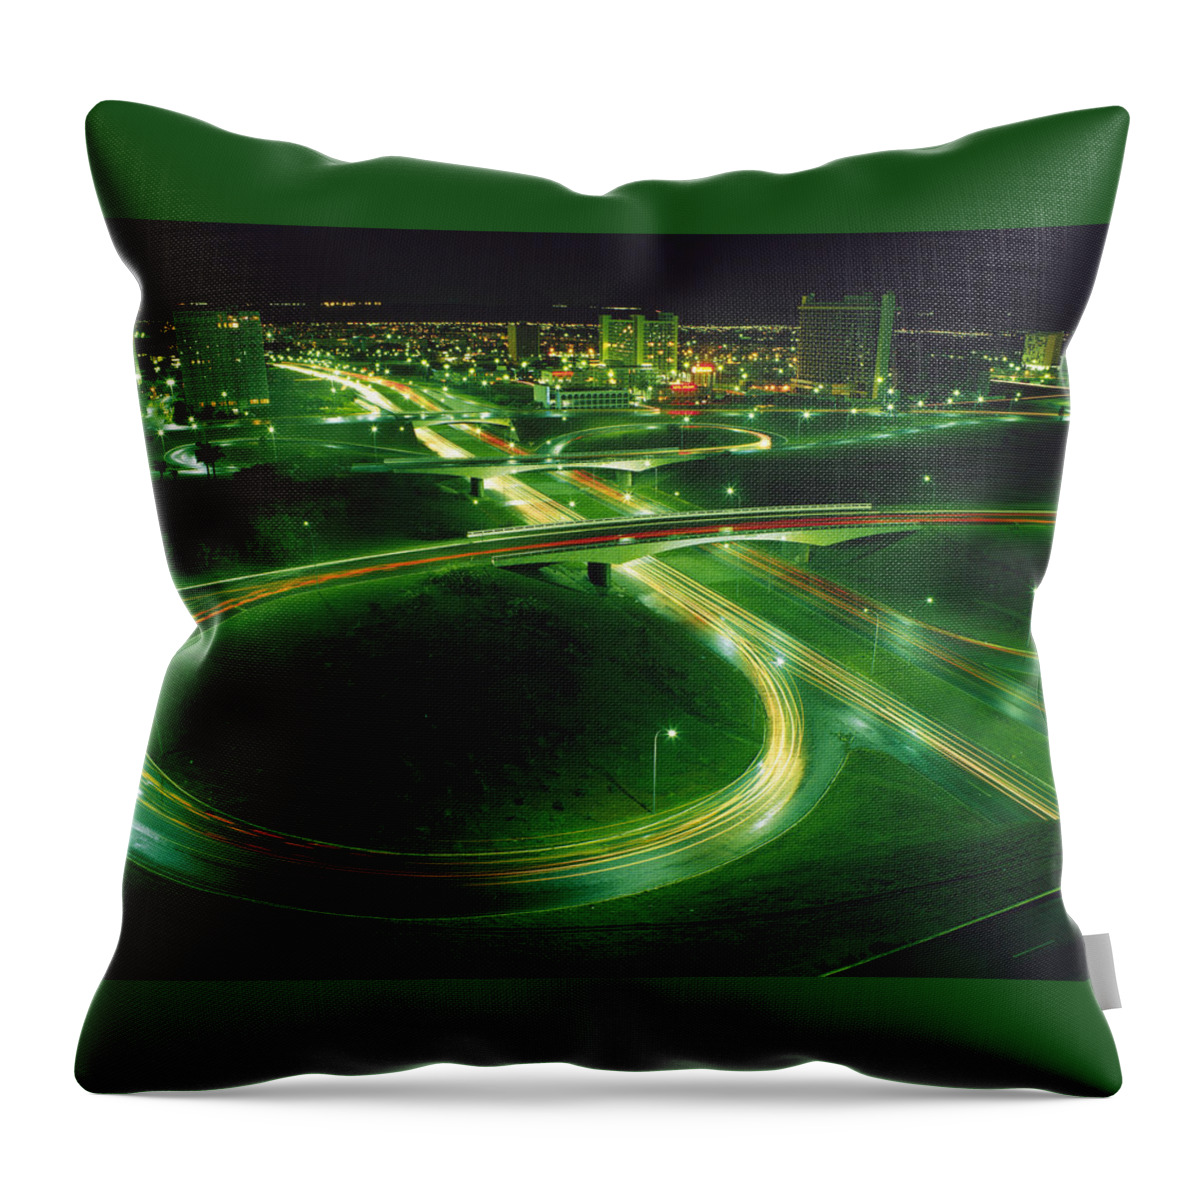 Time-lapse Throw Pillow featuring the digital art Time-lapse by Super Lovely